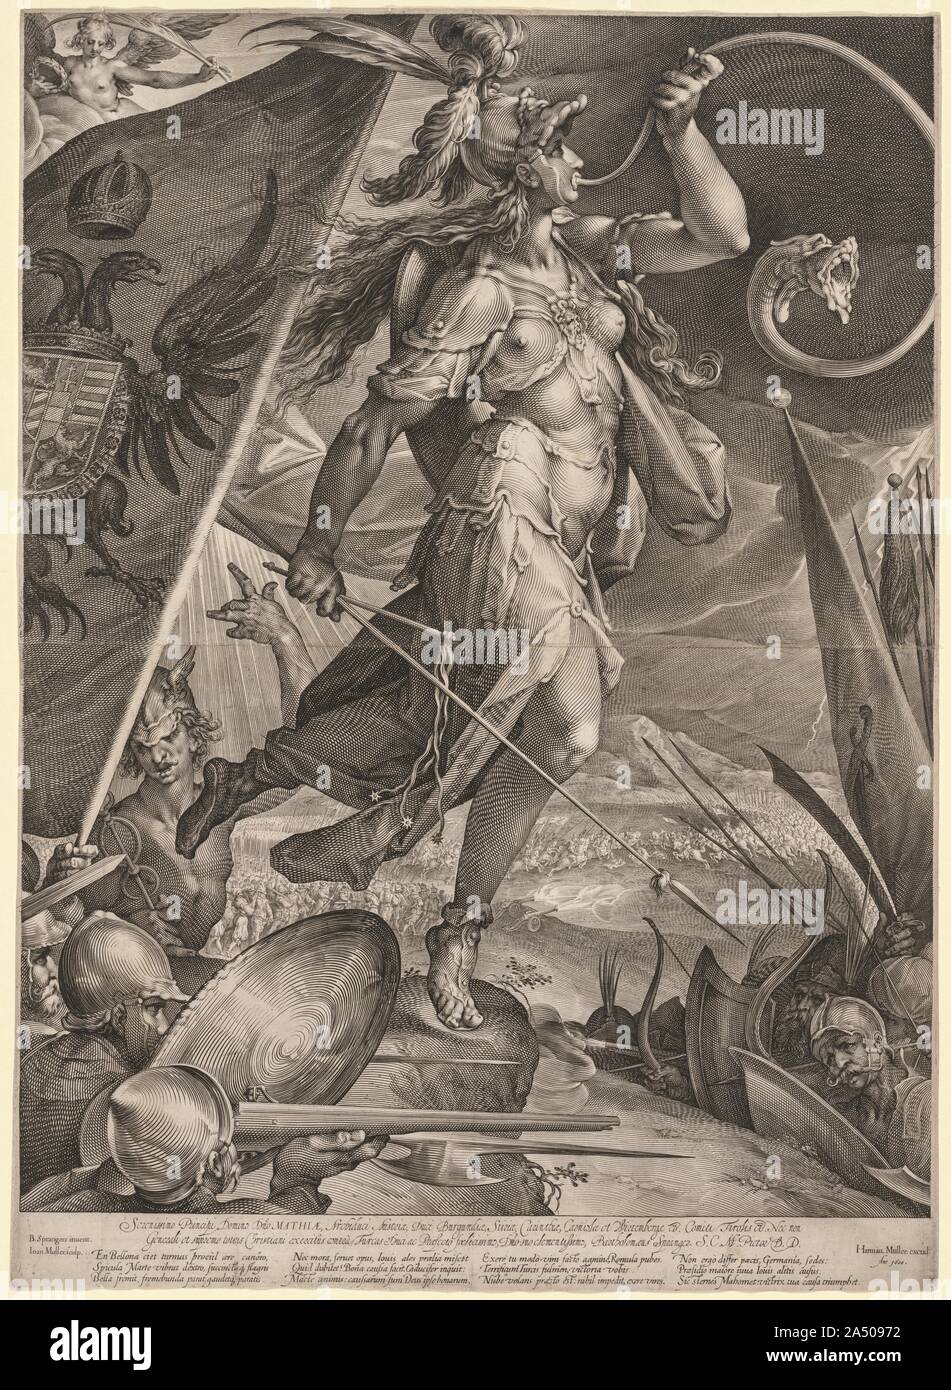 Bellona Leading the Armies of the Emperor against the Turks, 1600. The central, striding figure, Bellona (the Roman goddess of war), is said to be either the sister or the wife of Mars, god of war. The double-headed eagle of the Hapsburgs appears on the flag behind her. Born in Amsterdam, Jan Muller probably learned engraving from his father, Harman Muller, a printmaker and publisher. He traveled to Italy in the 1590s and presumably stopped in Prague along the way. There he made prints based on designs by artists employed at the Hapsburg court, including Bartholomeaus Spranger (1546-1611). Stock Photo